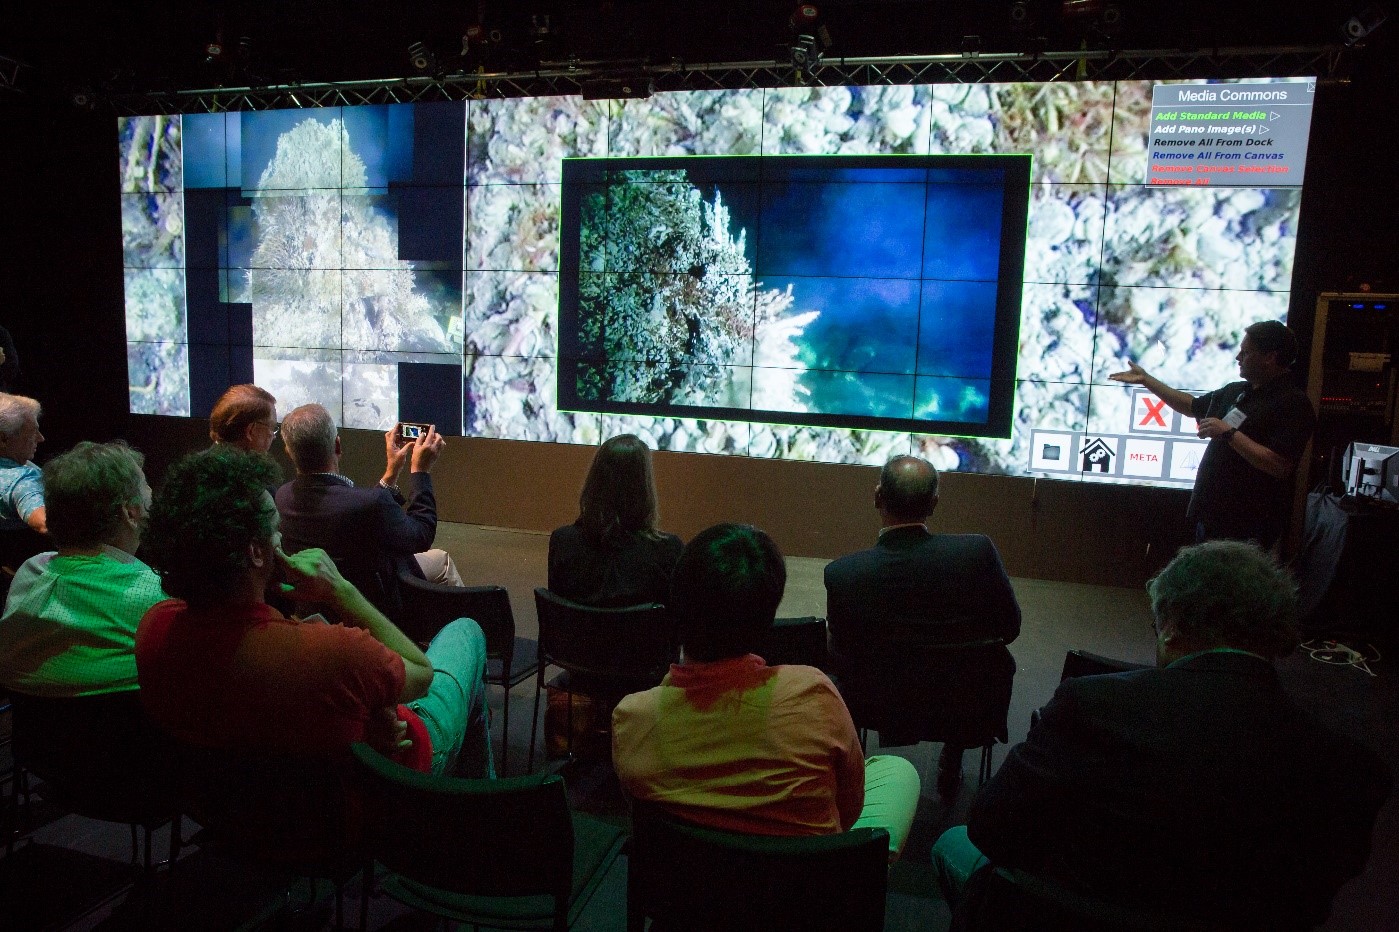 Figure 2. The large Video Wall in the Qualcomm Institute V-Room hosts several high-resolution images of the Mushroom structure, and a live feed of HD Video directly from the seafloor as an inset.  Audience members can be seen in the foreground, giving a sense of the size of the display (10 feet high x 36 feet long).